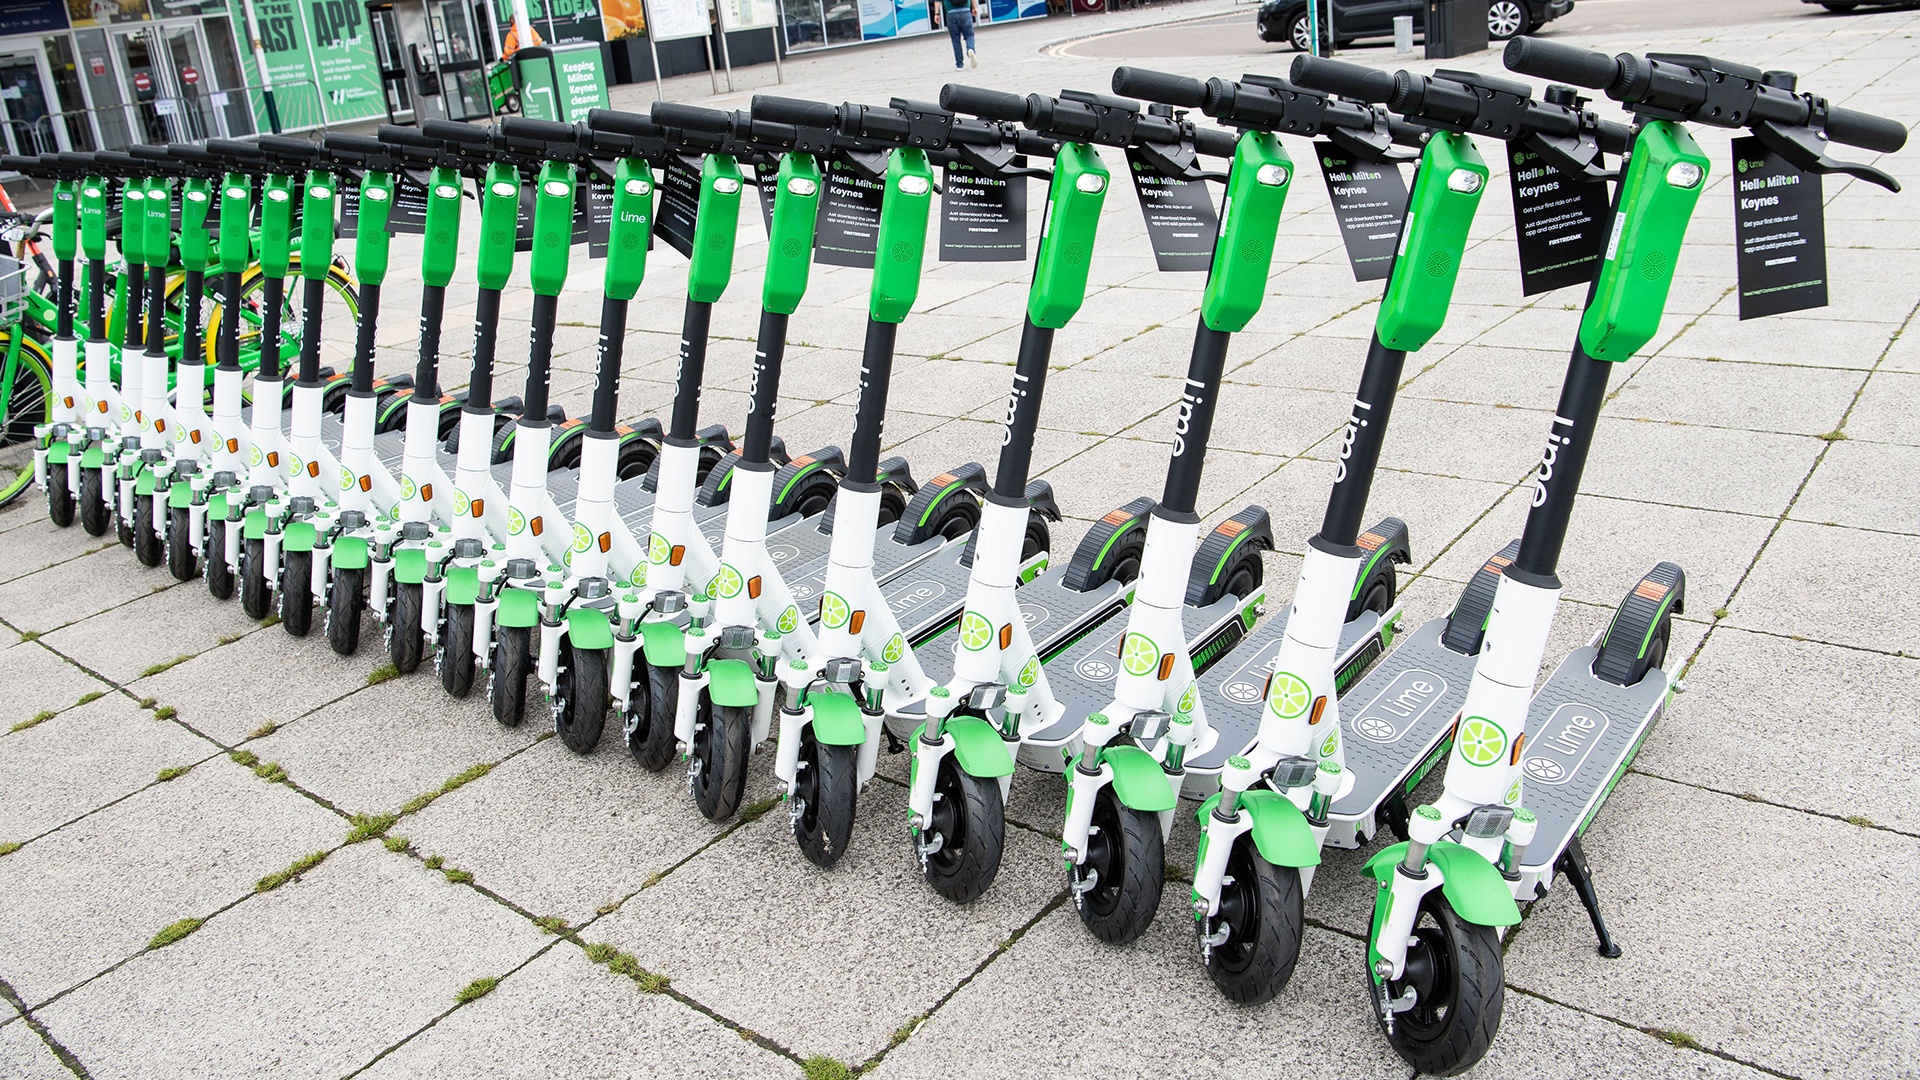 Lime e-scooters launch charity partnership in Milton Keynes